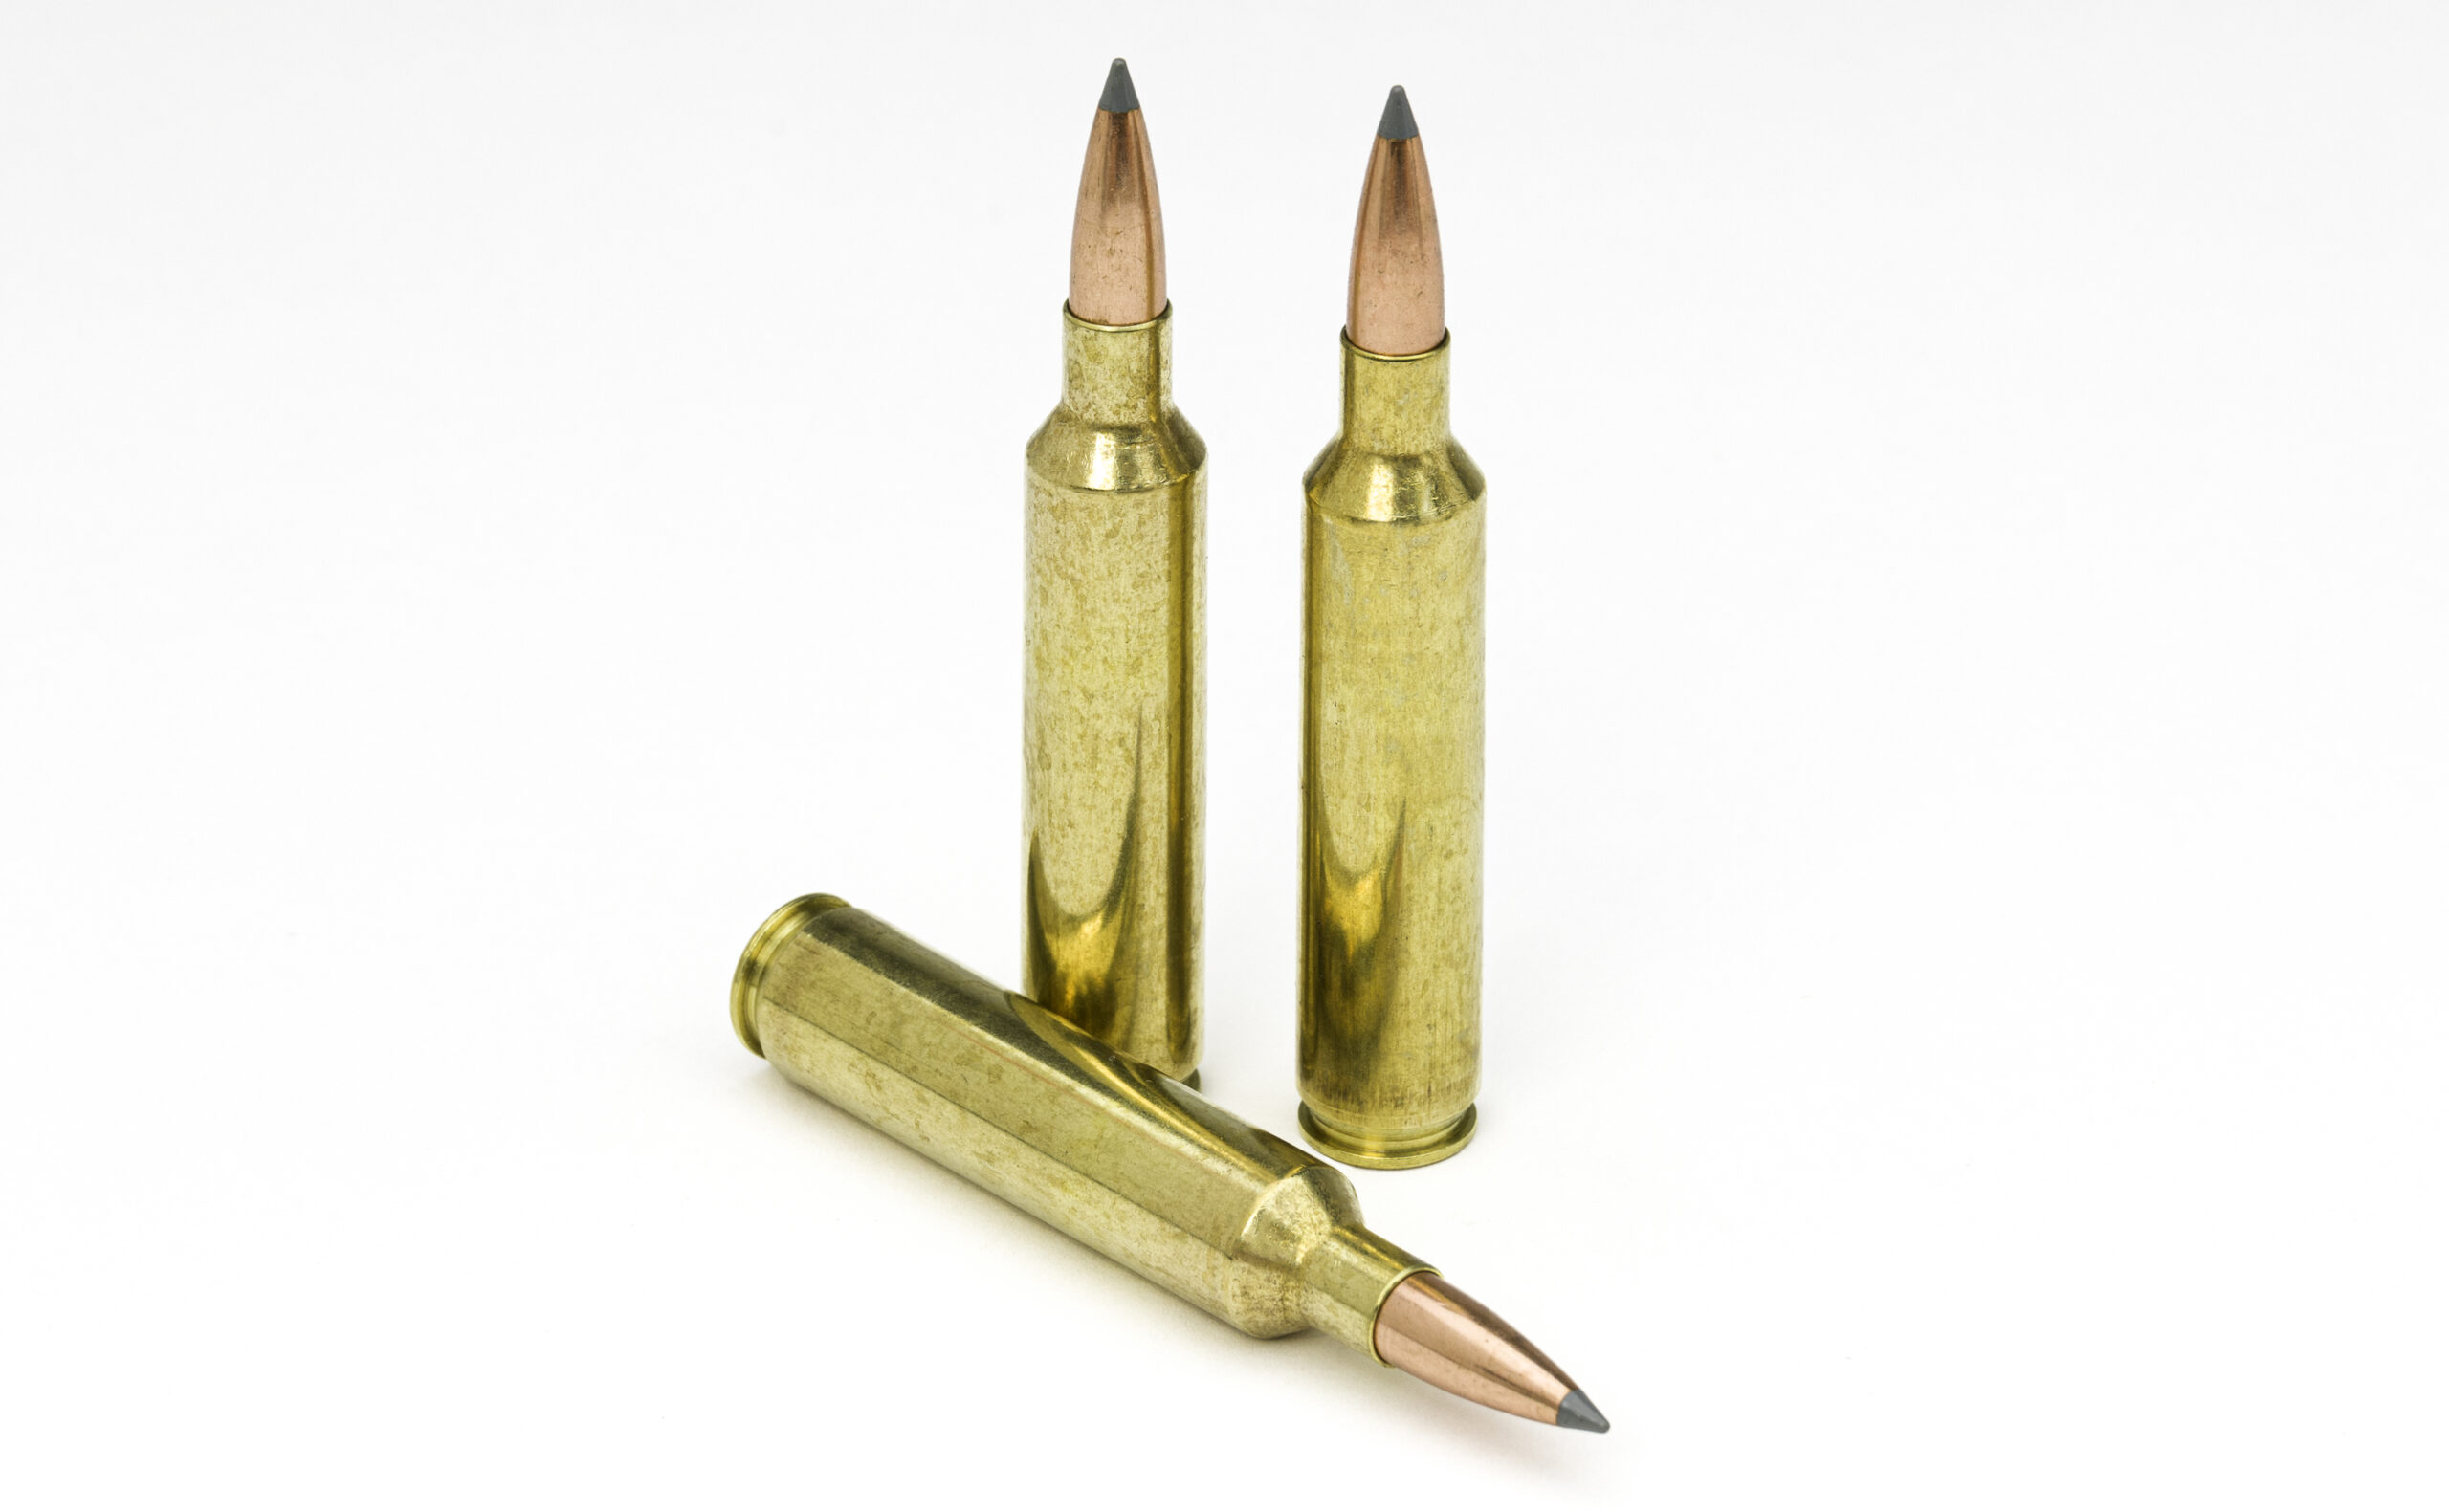 The 27 Nosler is a great long-range round for deer hunters.